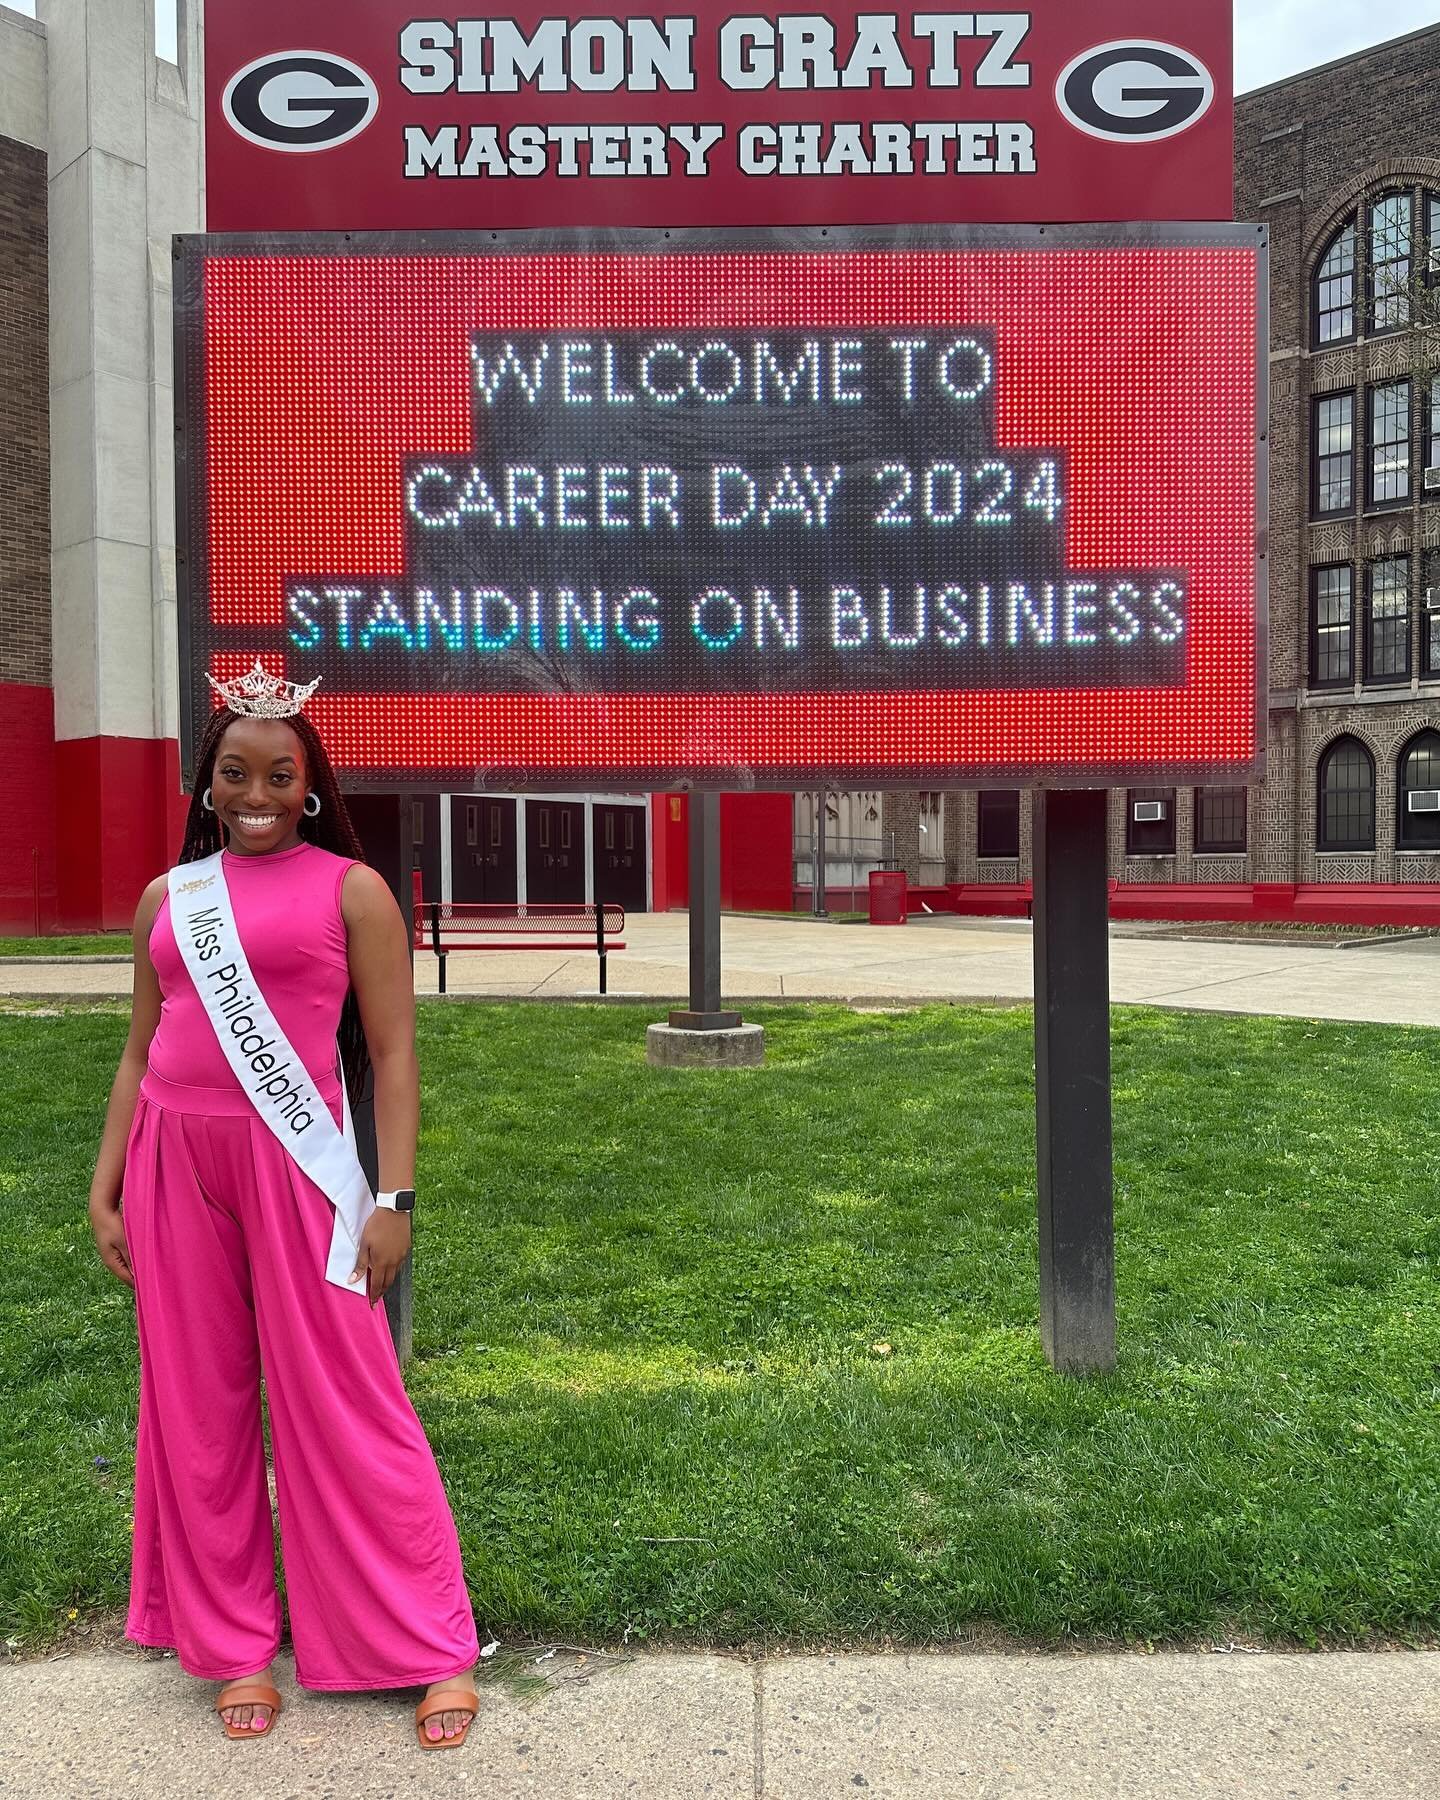 We&rsquo;re &ldquo;Standing On Business&rdquo; and making sure the students of Simon Gratz High School are too! 

Special thank you to @sgmcbulldogs &amp; @saroya_marie for inviting me to speak to students about both my experiences so far as Miss Phi